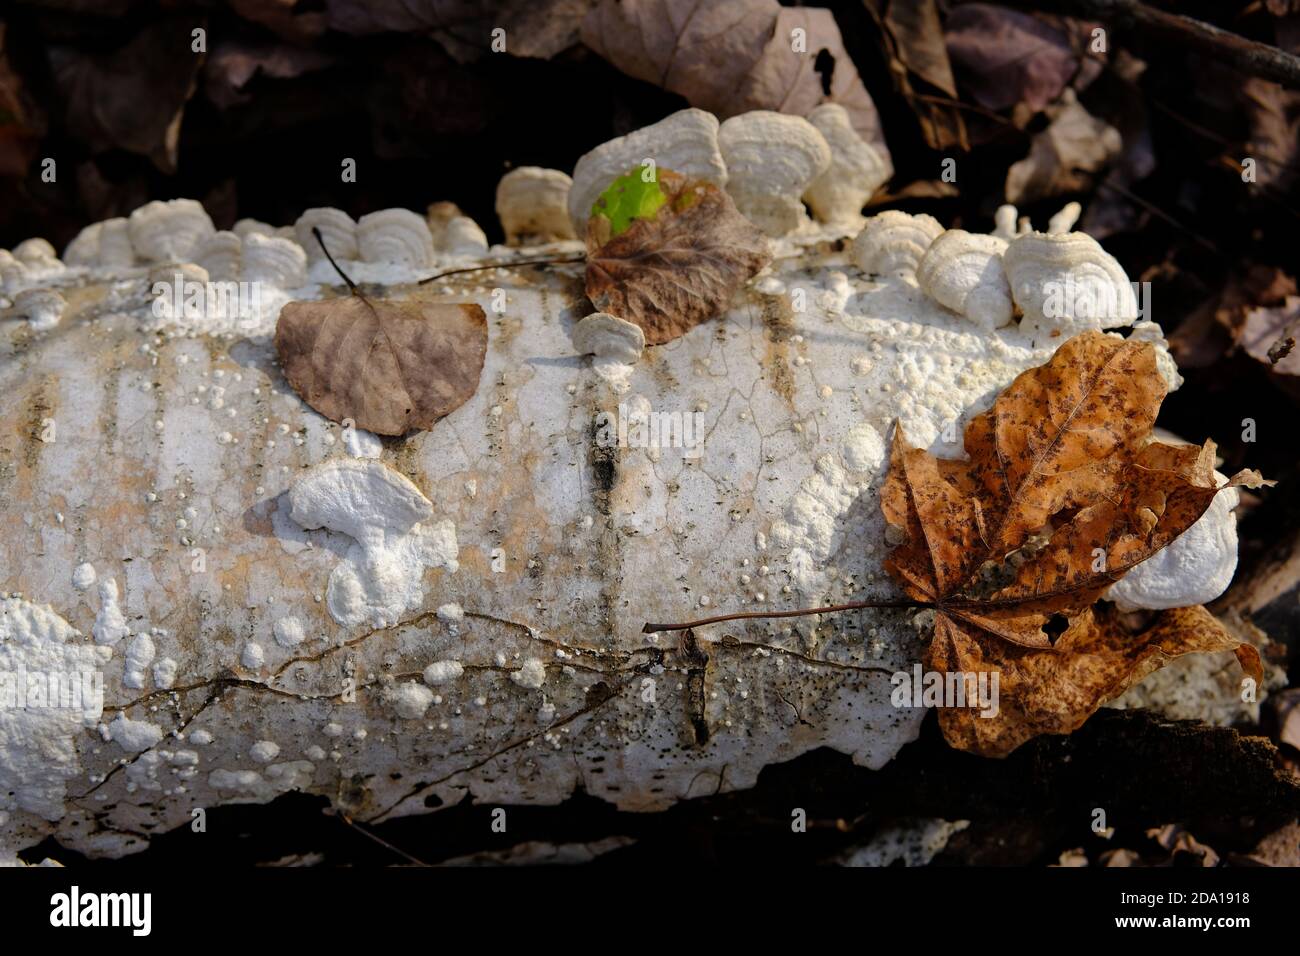 White shelf / bracket fungus on a fallen birch log, seemingly spreading and blistering over the whole surface. Ottawa, Ontario, Canada. Stock Photo